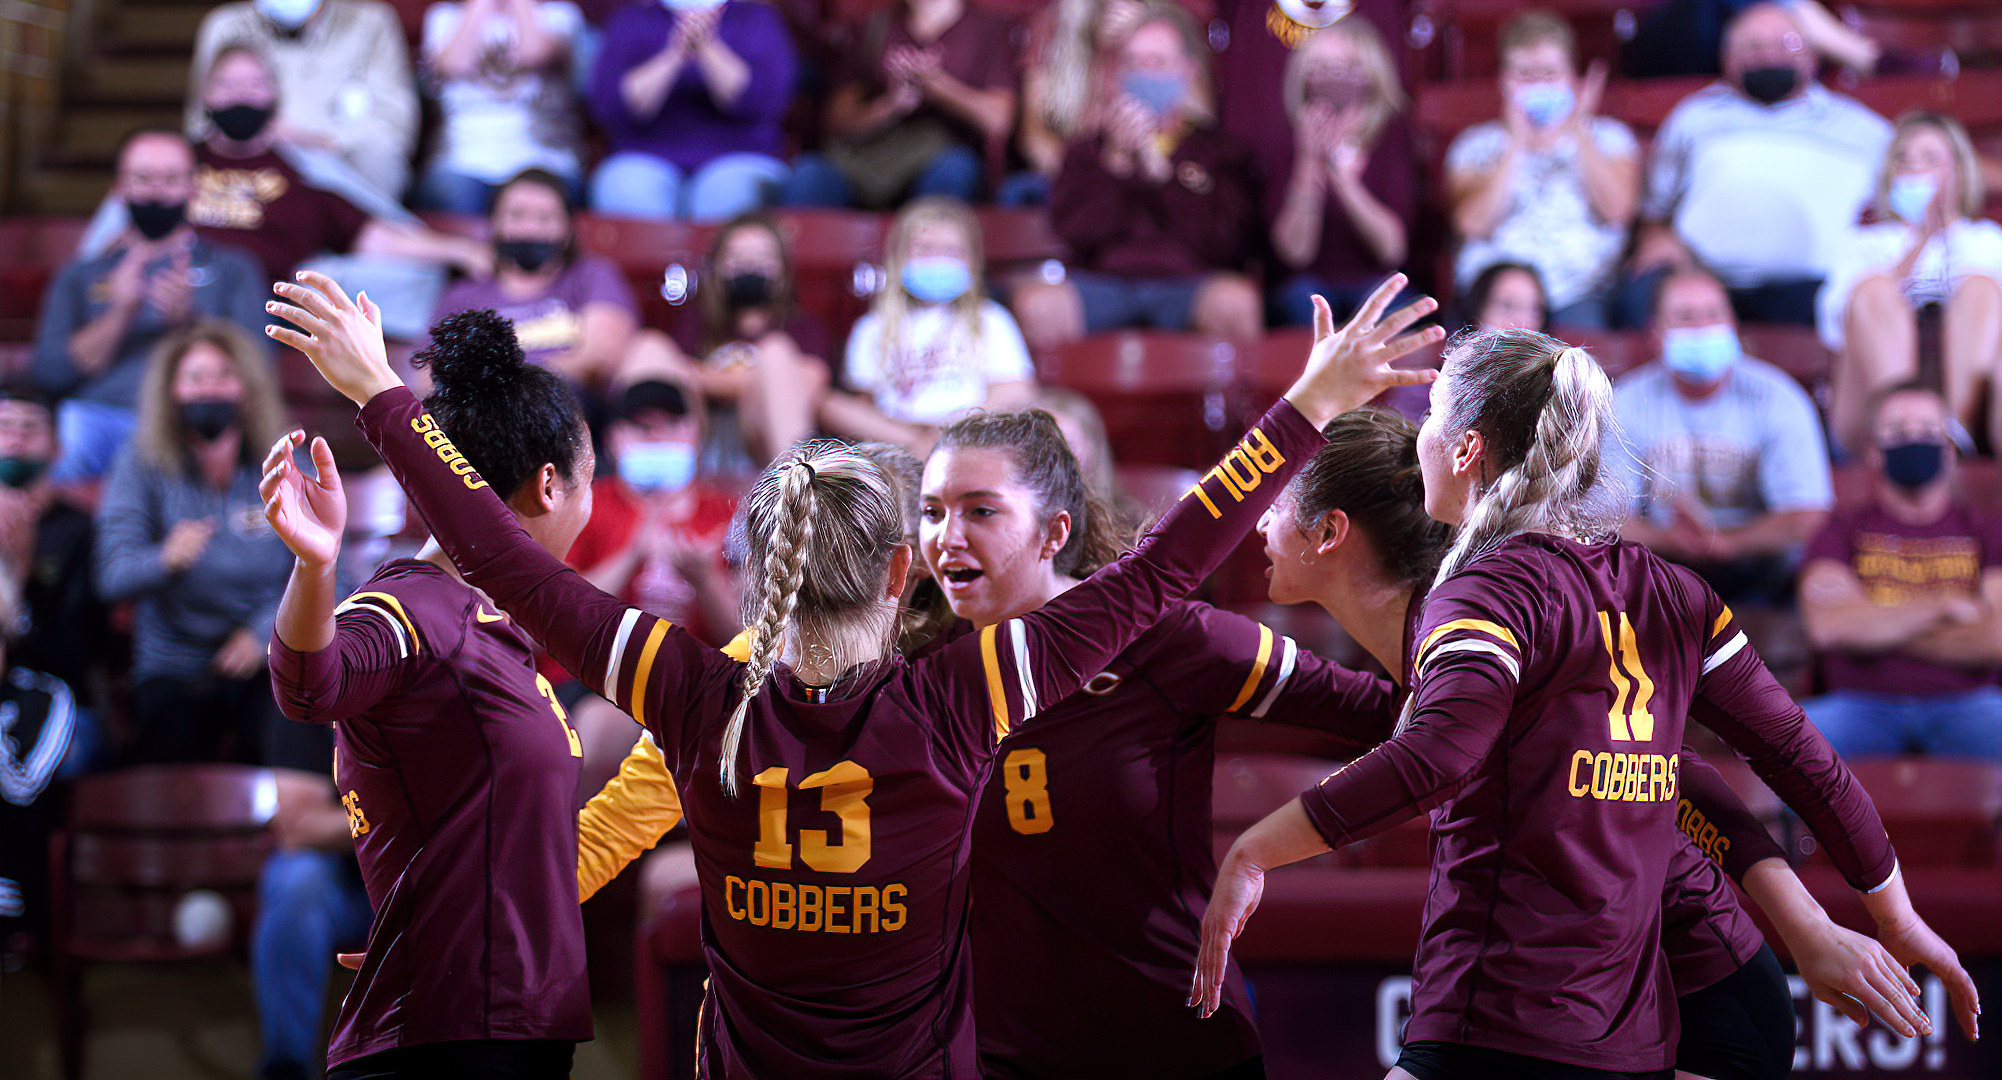 Concordia celebrates being back in front of fans during their home opener with Augsburg.  CC played a spirited first set, but ended up losing 3-0.